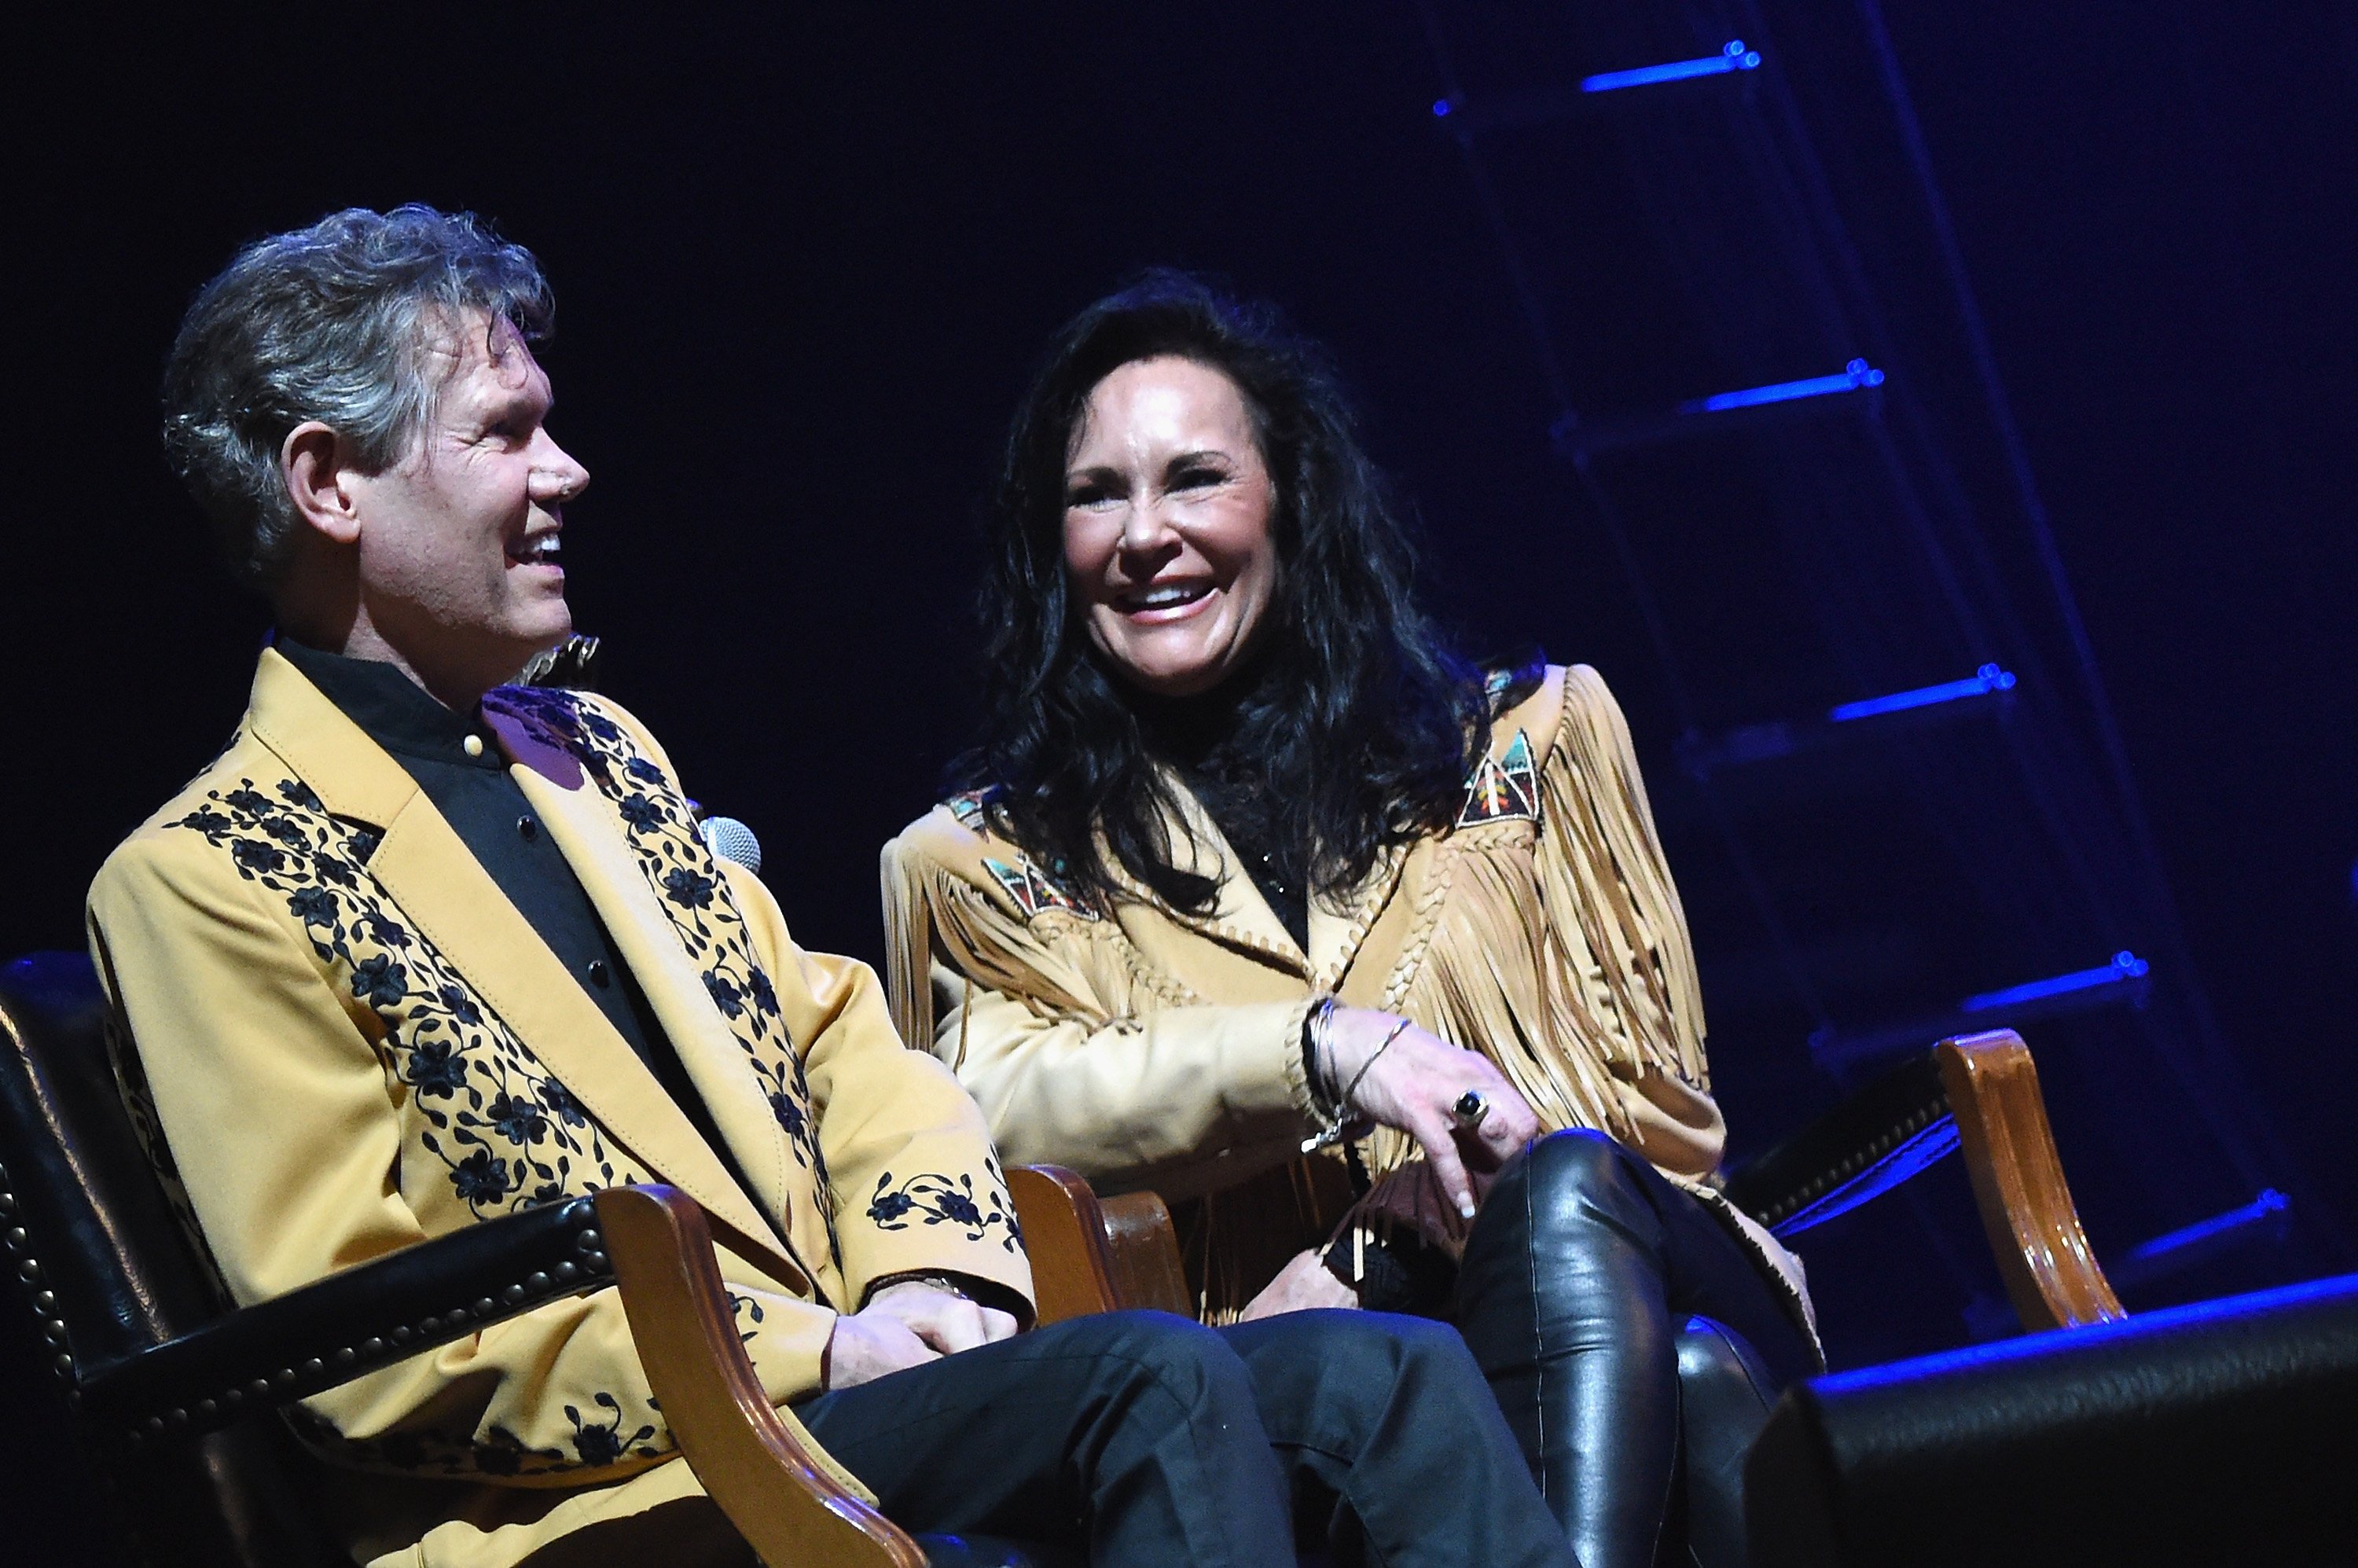 Randy Travis and Mary Beougher on stage at "1 Night. 1 Place. 1 Time: A Heroes & Friends Tribute to Randy Travis" on February 8, 2017, in Nashville | Source: Getty Images